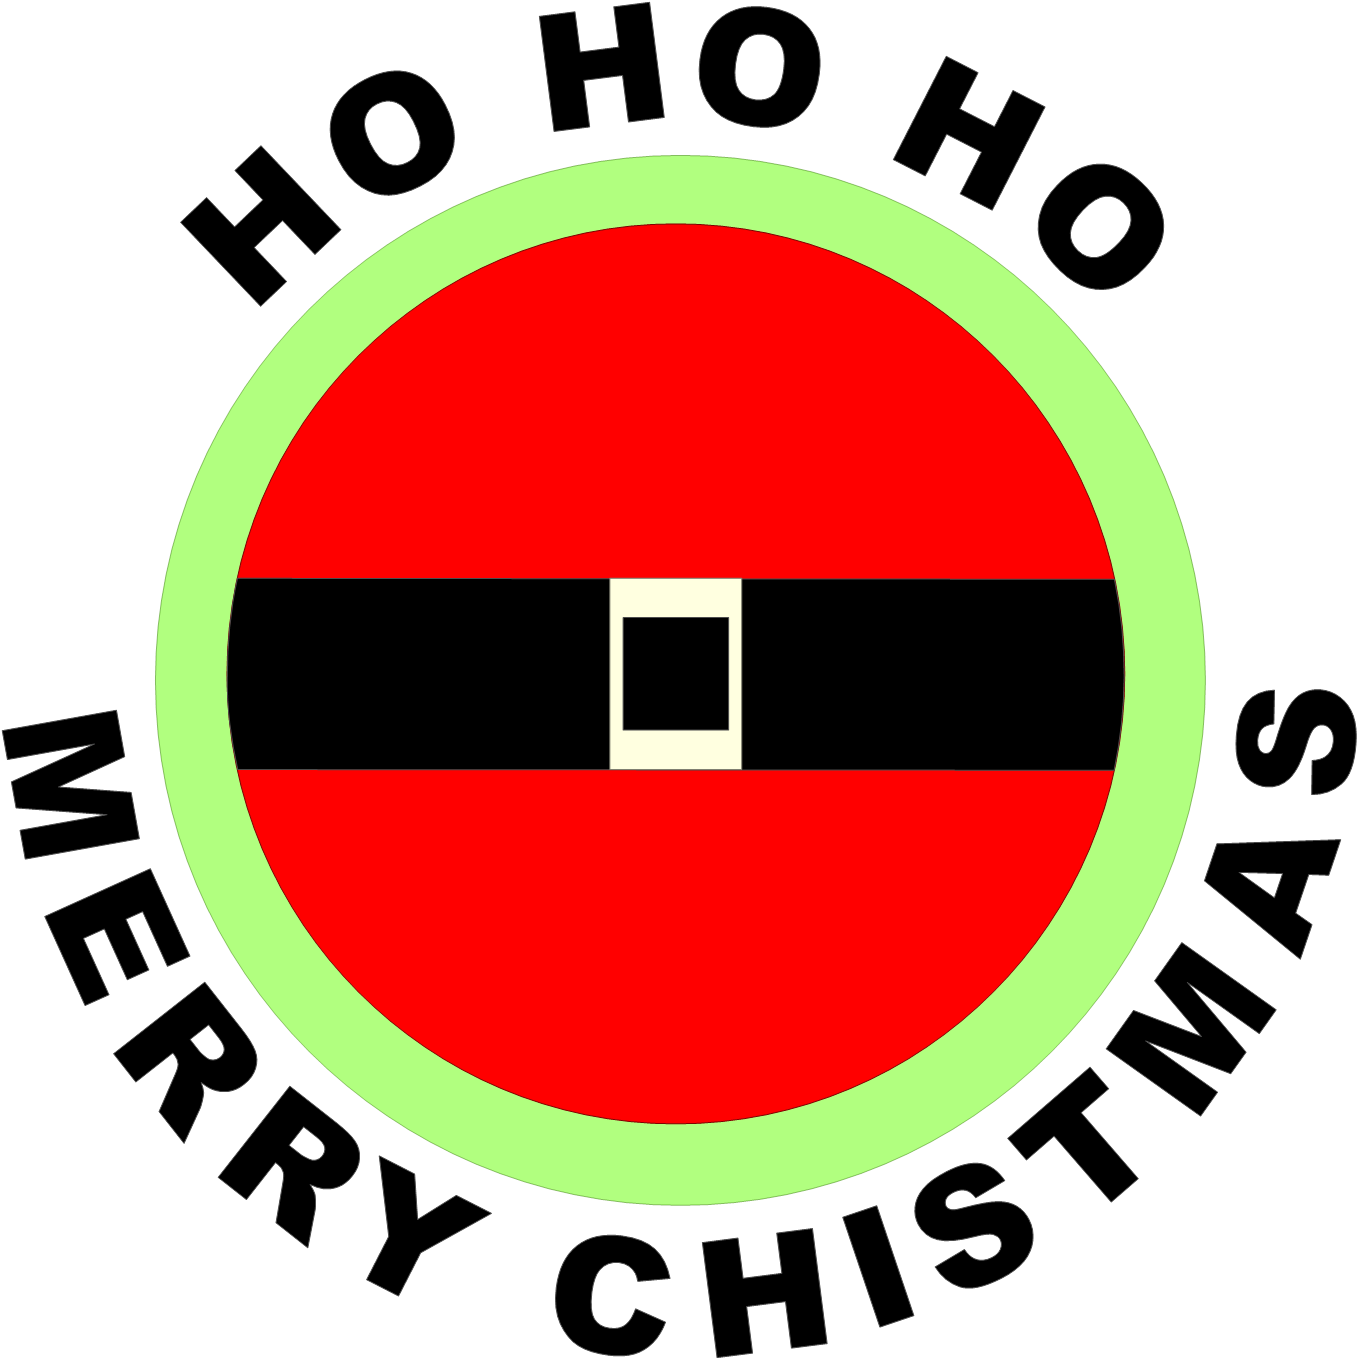 A Red And Green Circle With Black Belt And White Text